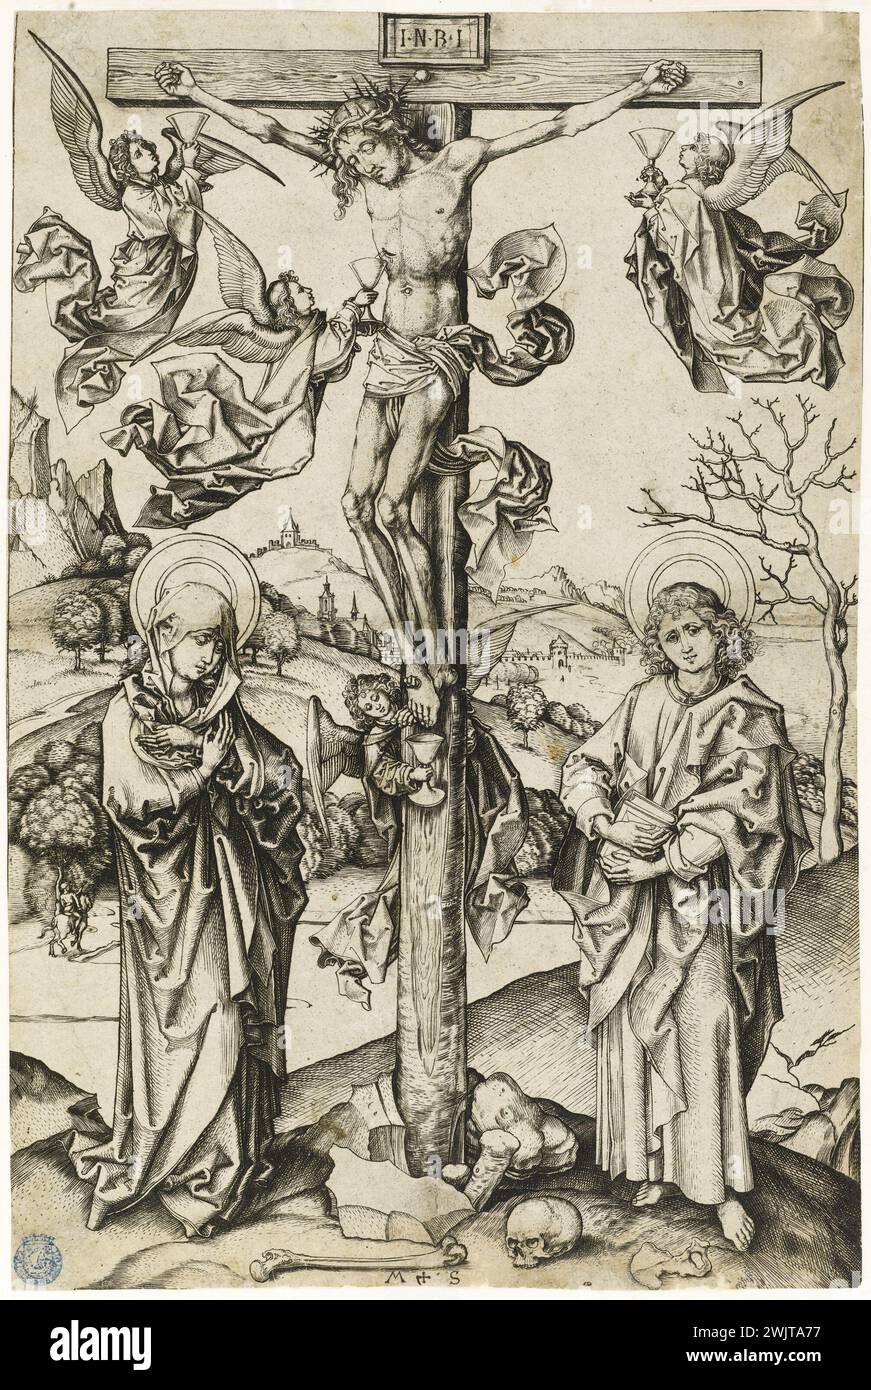 Martin Schonguer (around 1450-1495). The Crucifixion with four angels (Bartsch 25). Engraving (chisel), 1475-1480. Museum of Fine Arts of the City of Paris, Petit Palais. 76854-1 Art medieval, Christianity, engraving in chisel, Christian iconography, religious iconography, Middle Ages, New Testament, biblical character, 15th XV 15th 15th 15th century, engraving Stock Photo